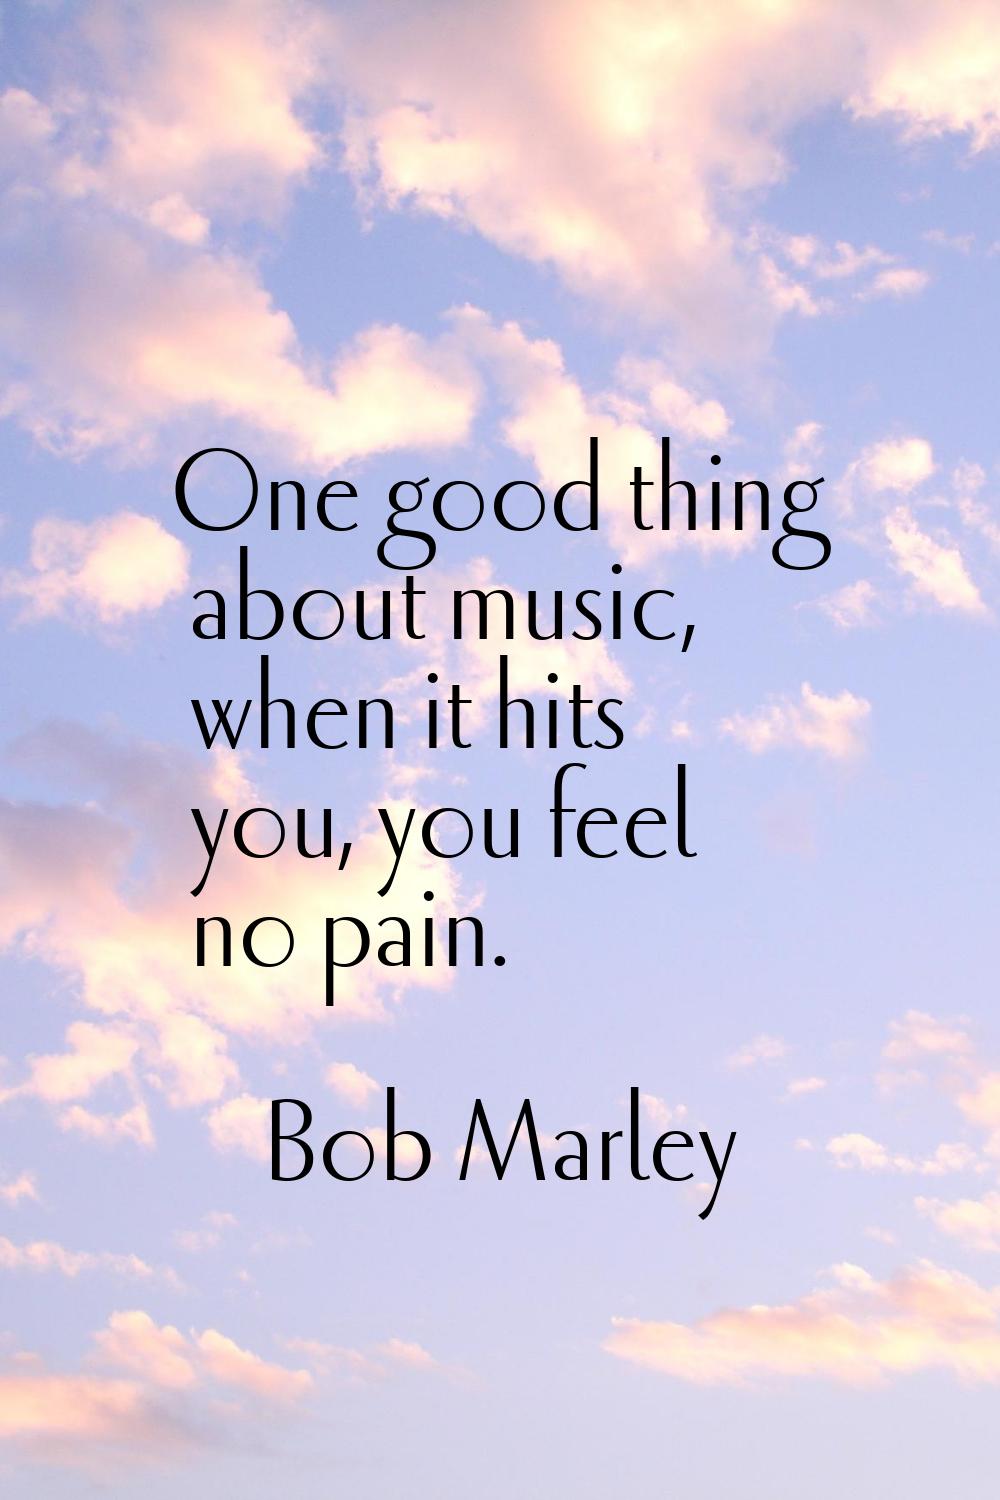 One good thing about music, when it hits you, you feel no pain.